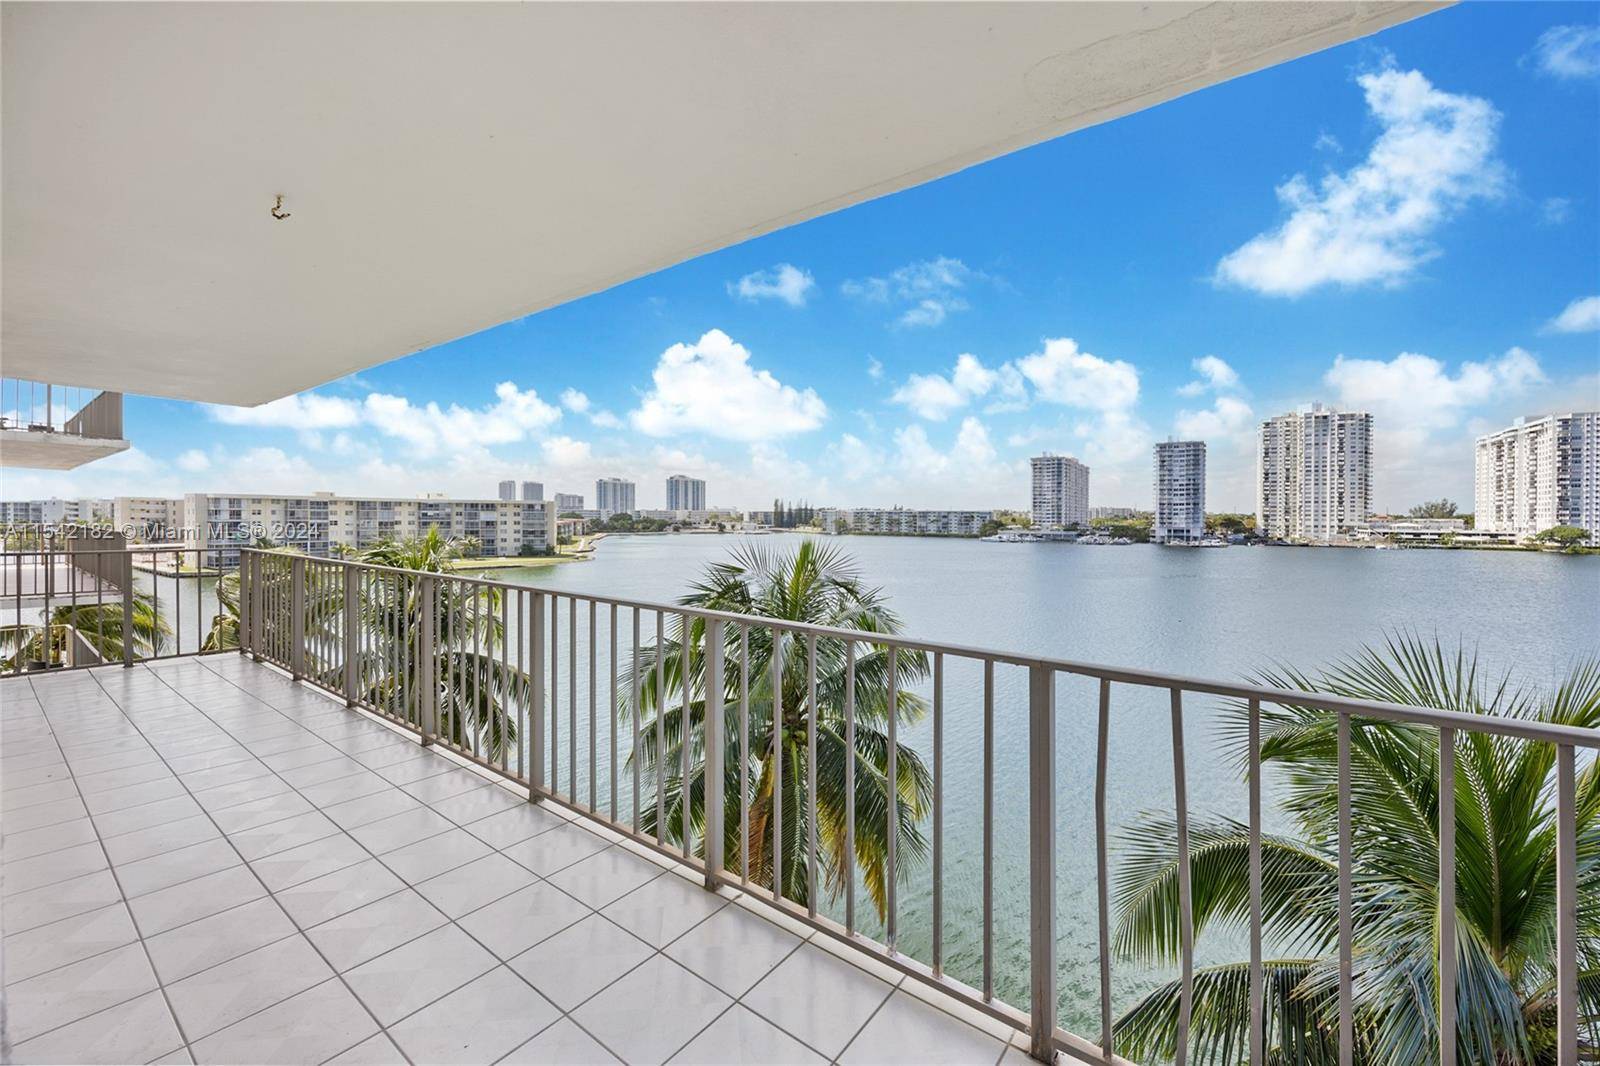 Completely renovated direct waterfront corner unit with spectacular views and wraparound balcony in the heart of Aventura next to exclusive Williams Island.